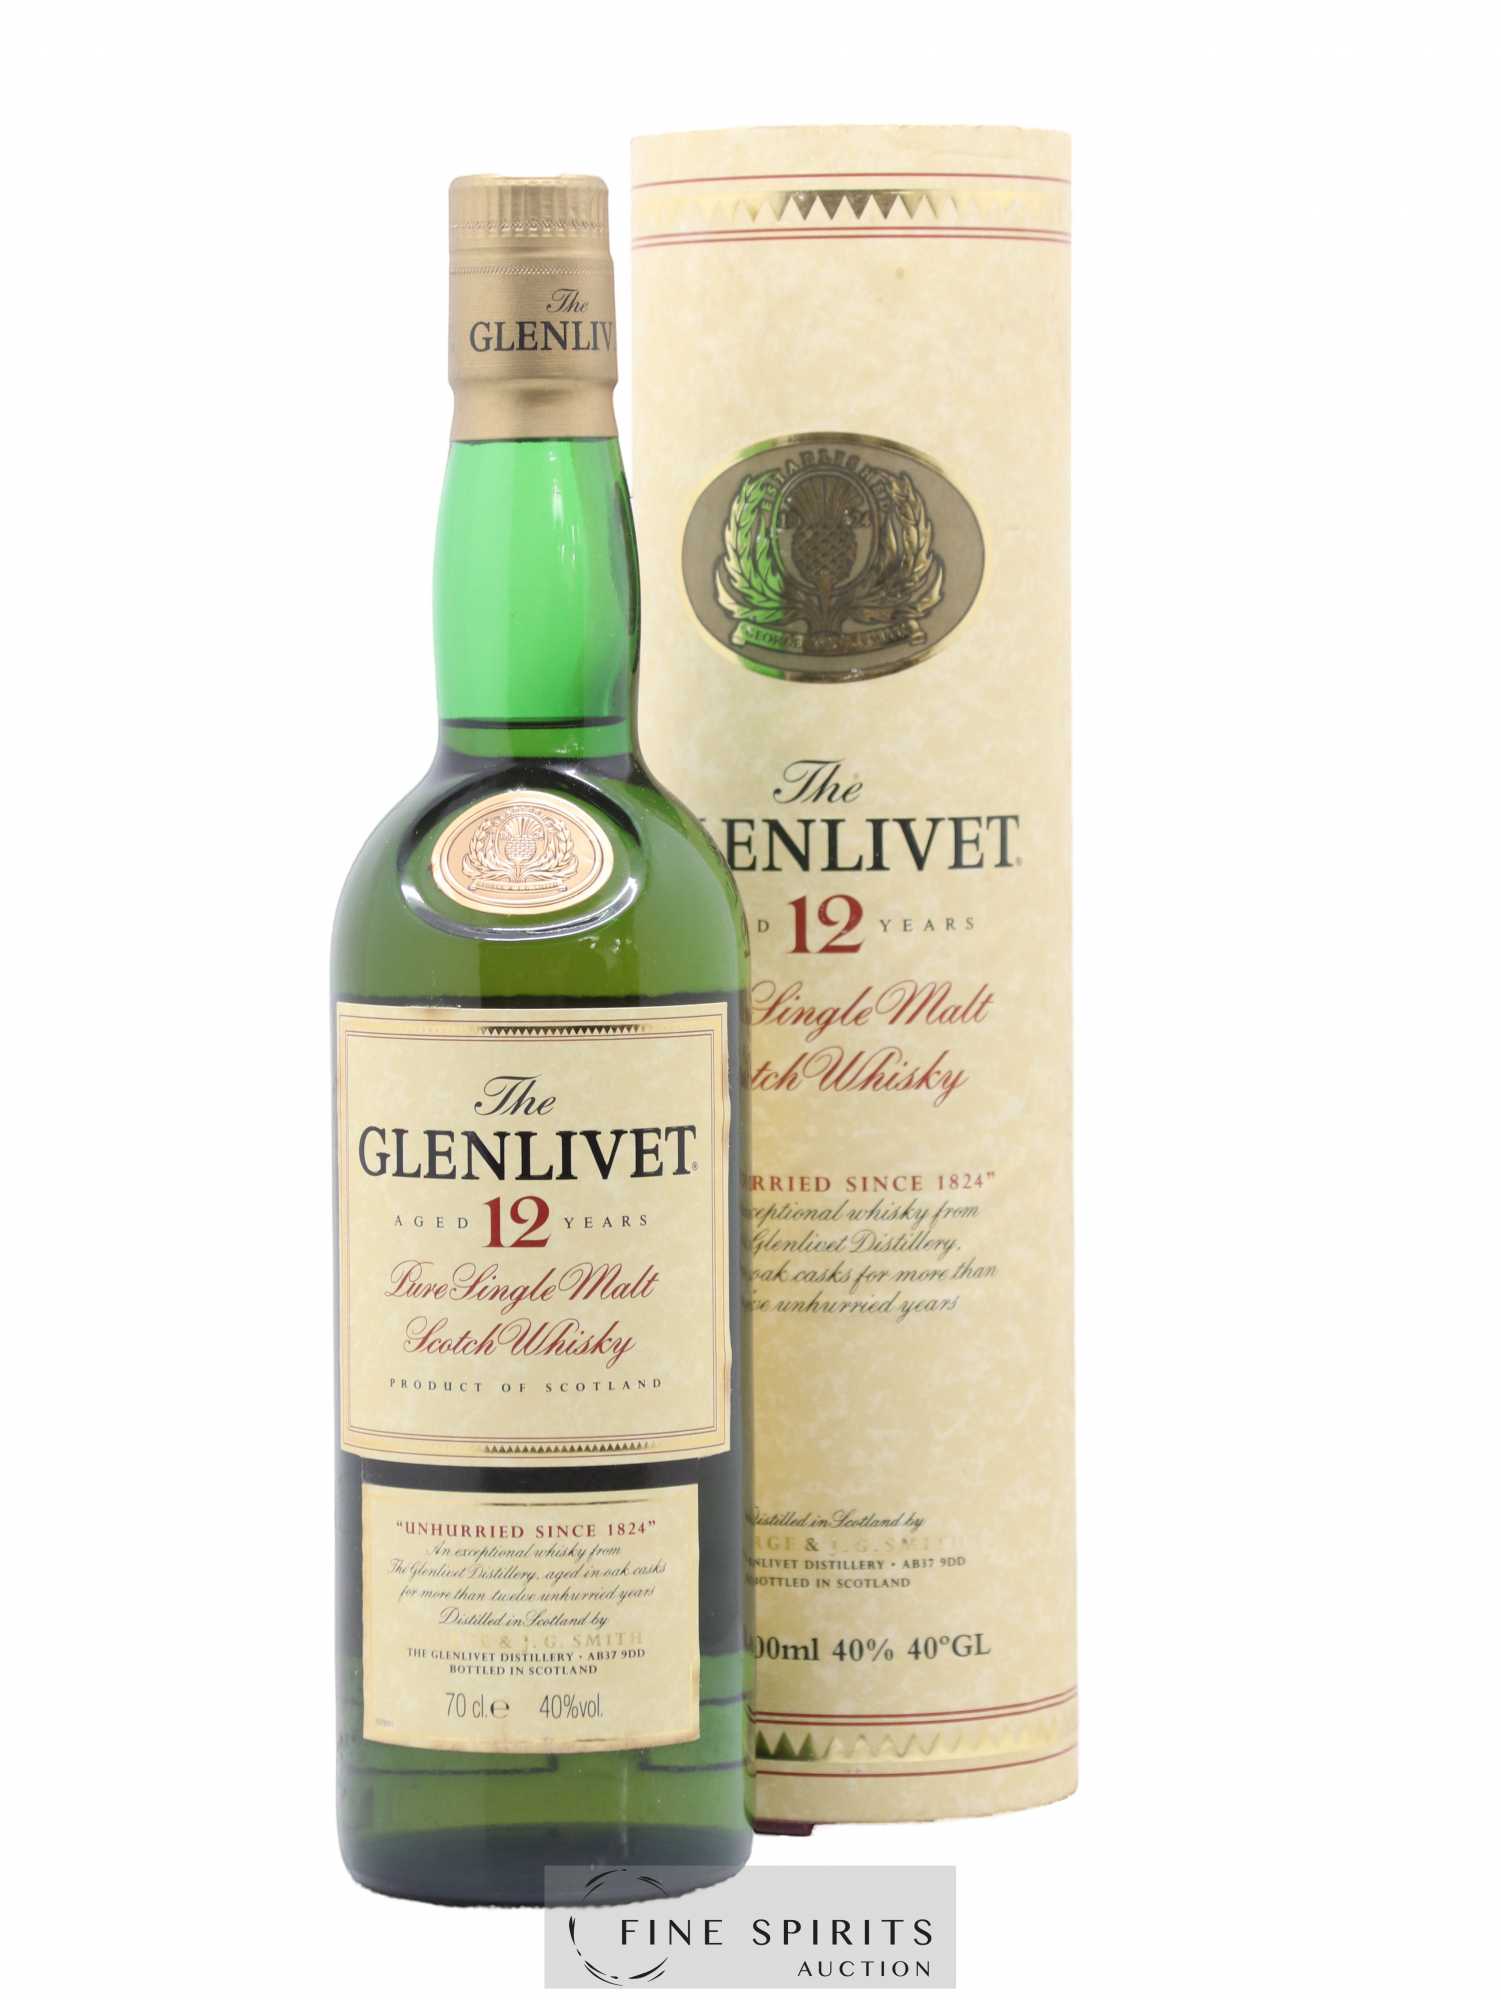 Glenlivet (The) 12 years Of. Unhurried since 1824